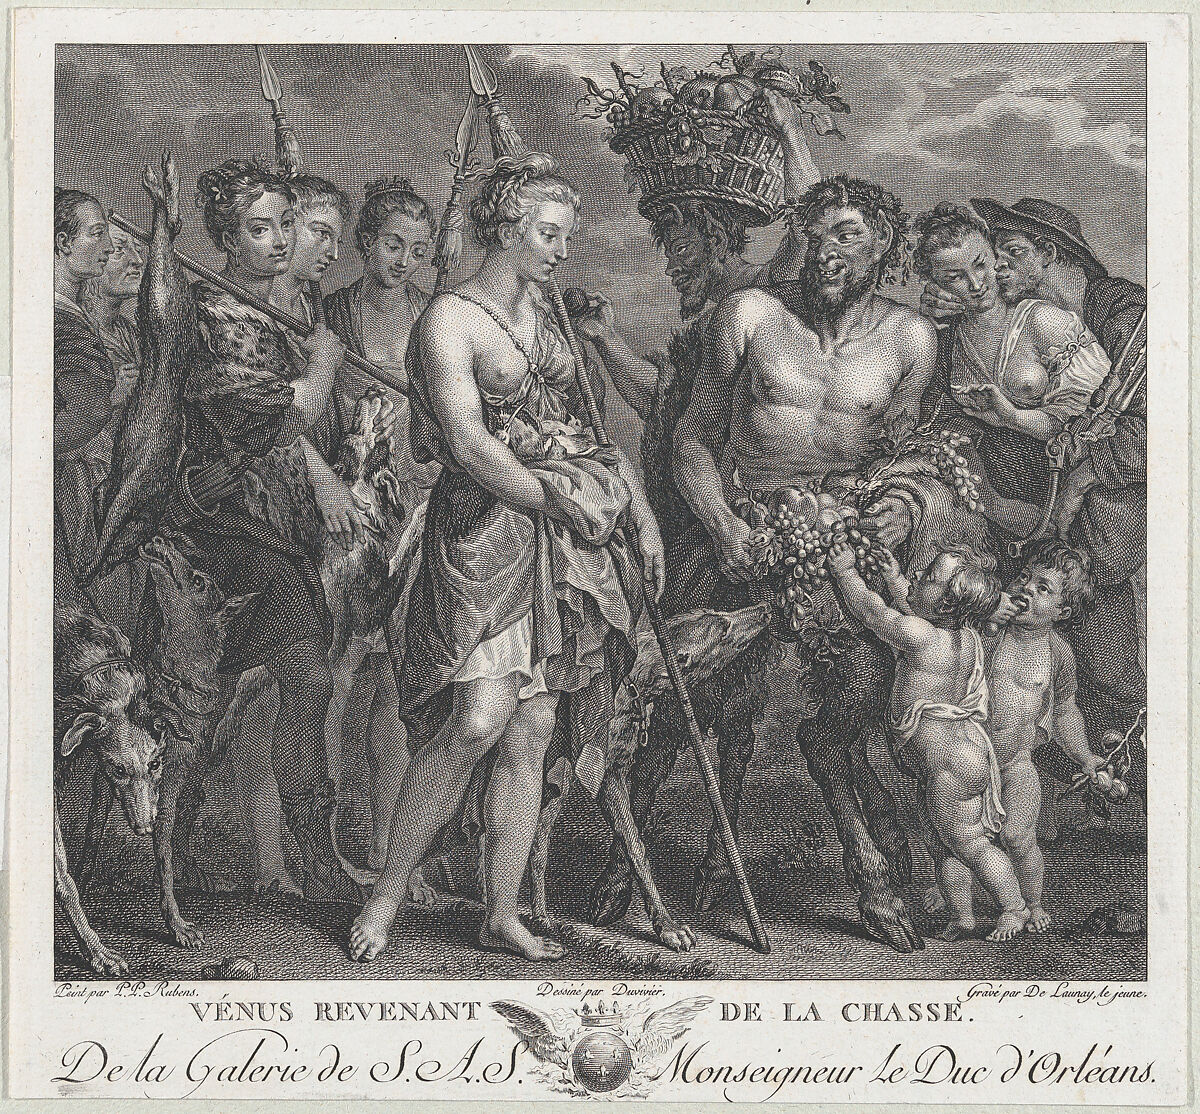 Diana returning from the chase, accompanied by dogs and her nymphs at left, two satyrs at right, Robert de Launay (French, Paris 1749–1814 Paris), Engraving 